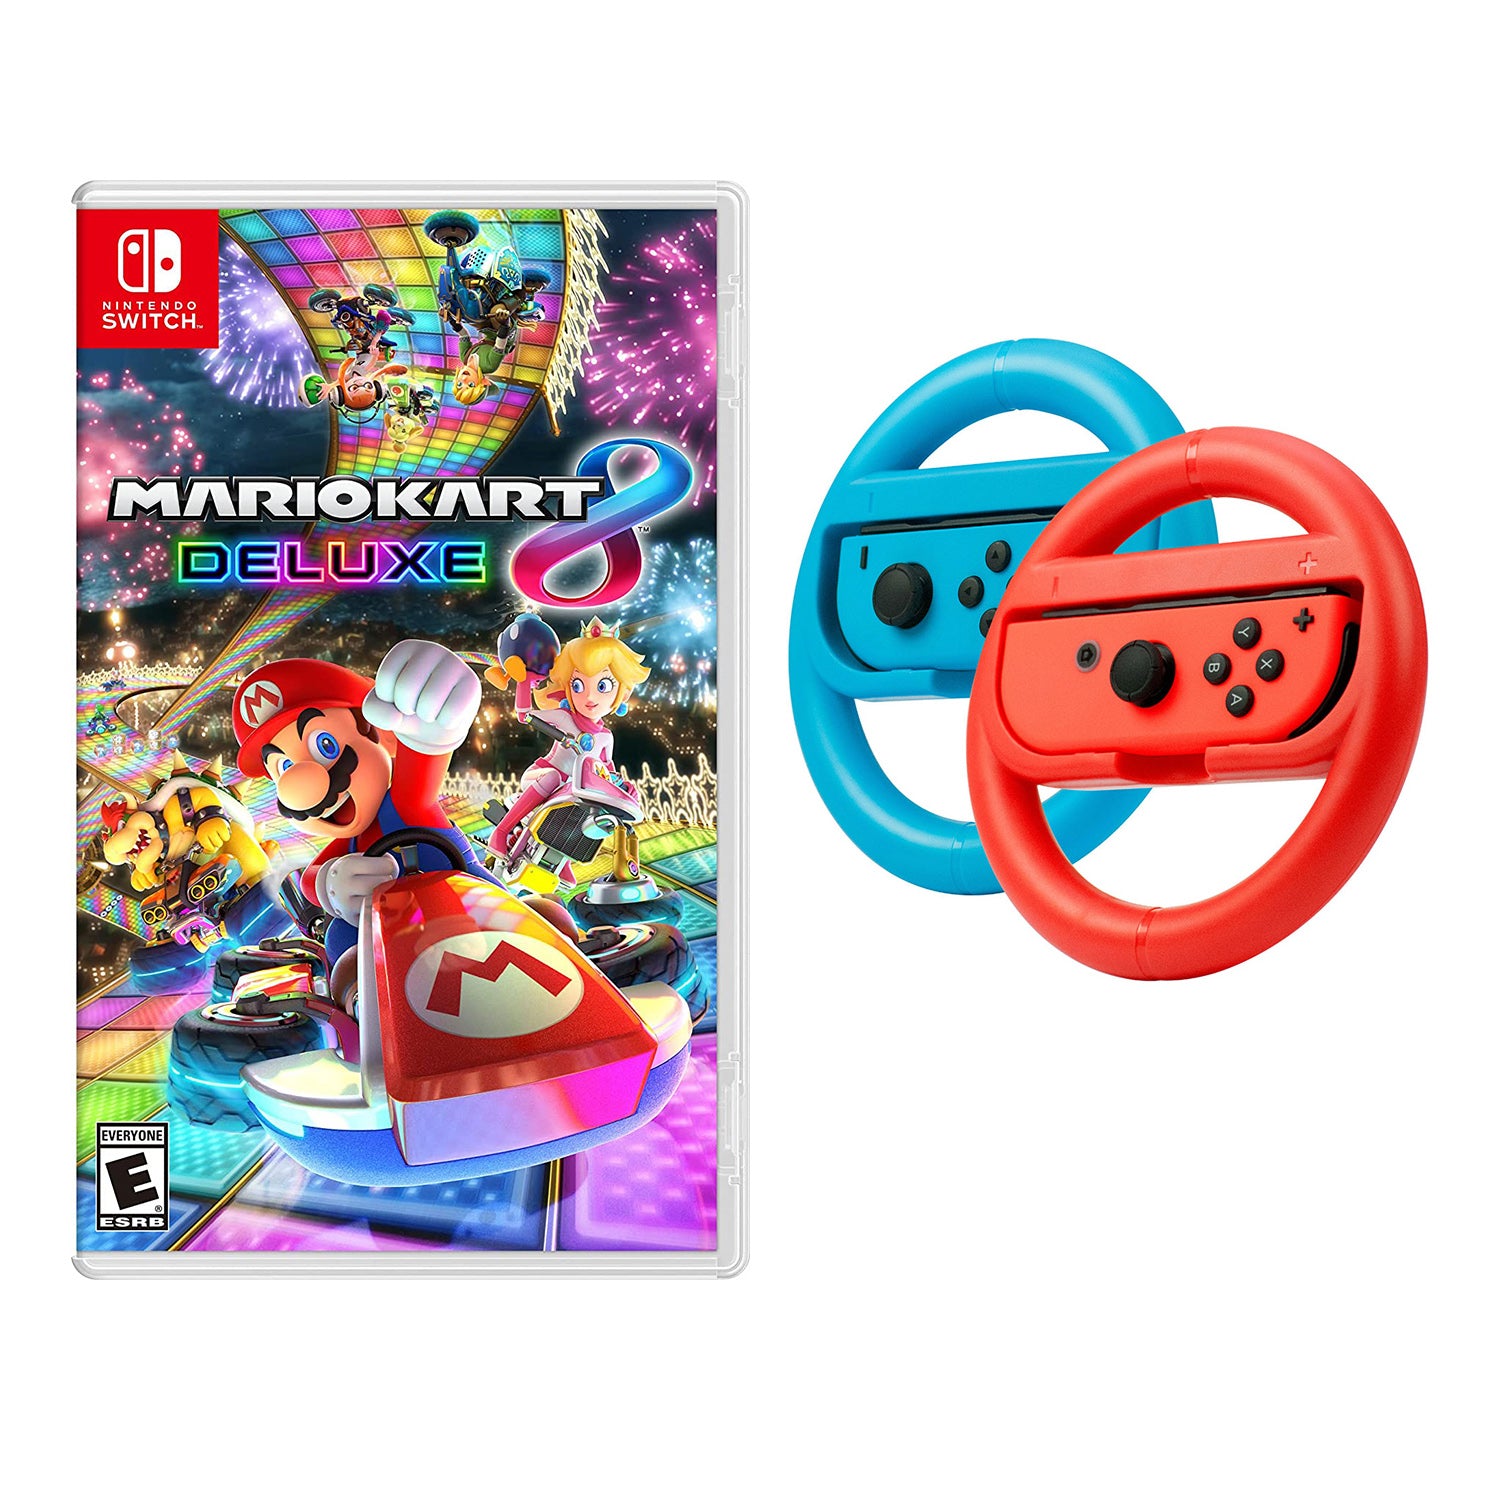 Mario Kart 8 Deluxe for Nintendo Switch Consoles with Joy-Con Steering Wheel Set and Screen Cleaning Cloth - Pro-Distributing